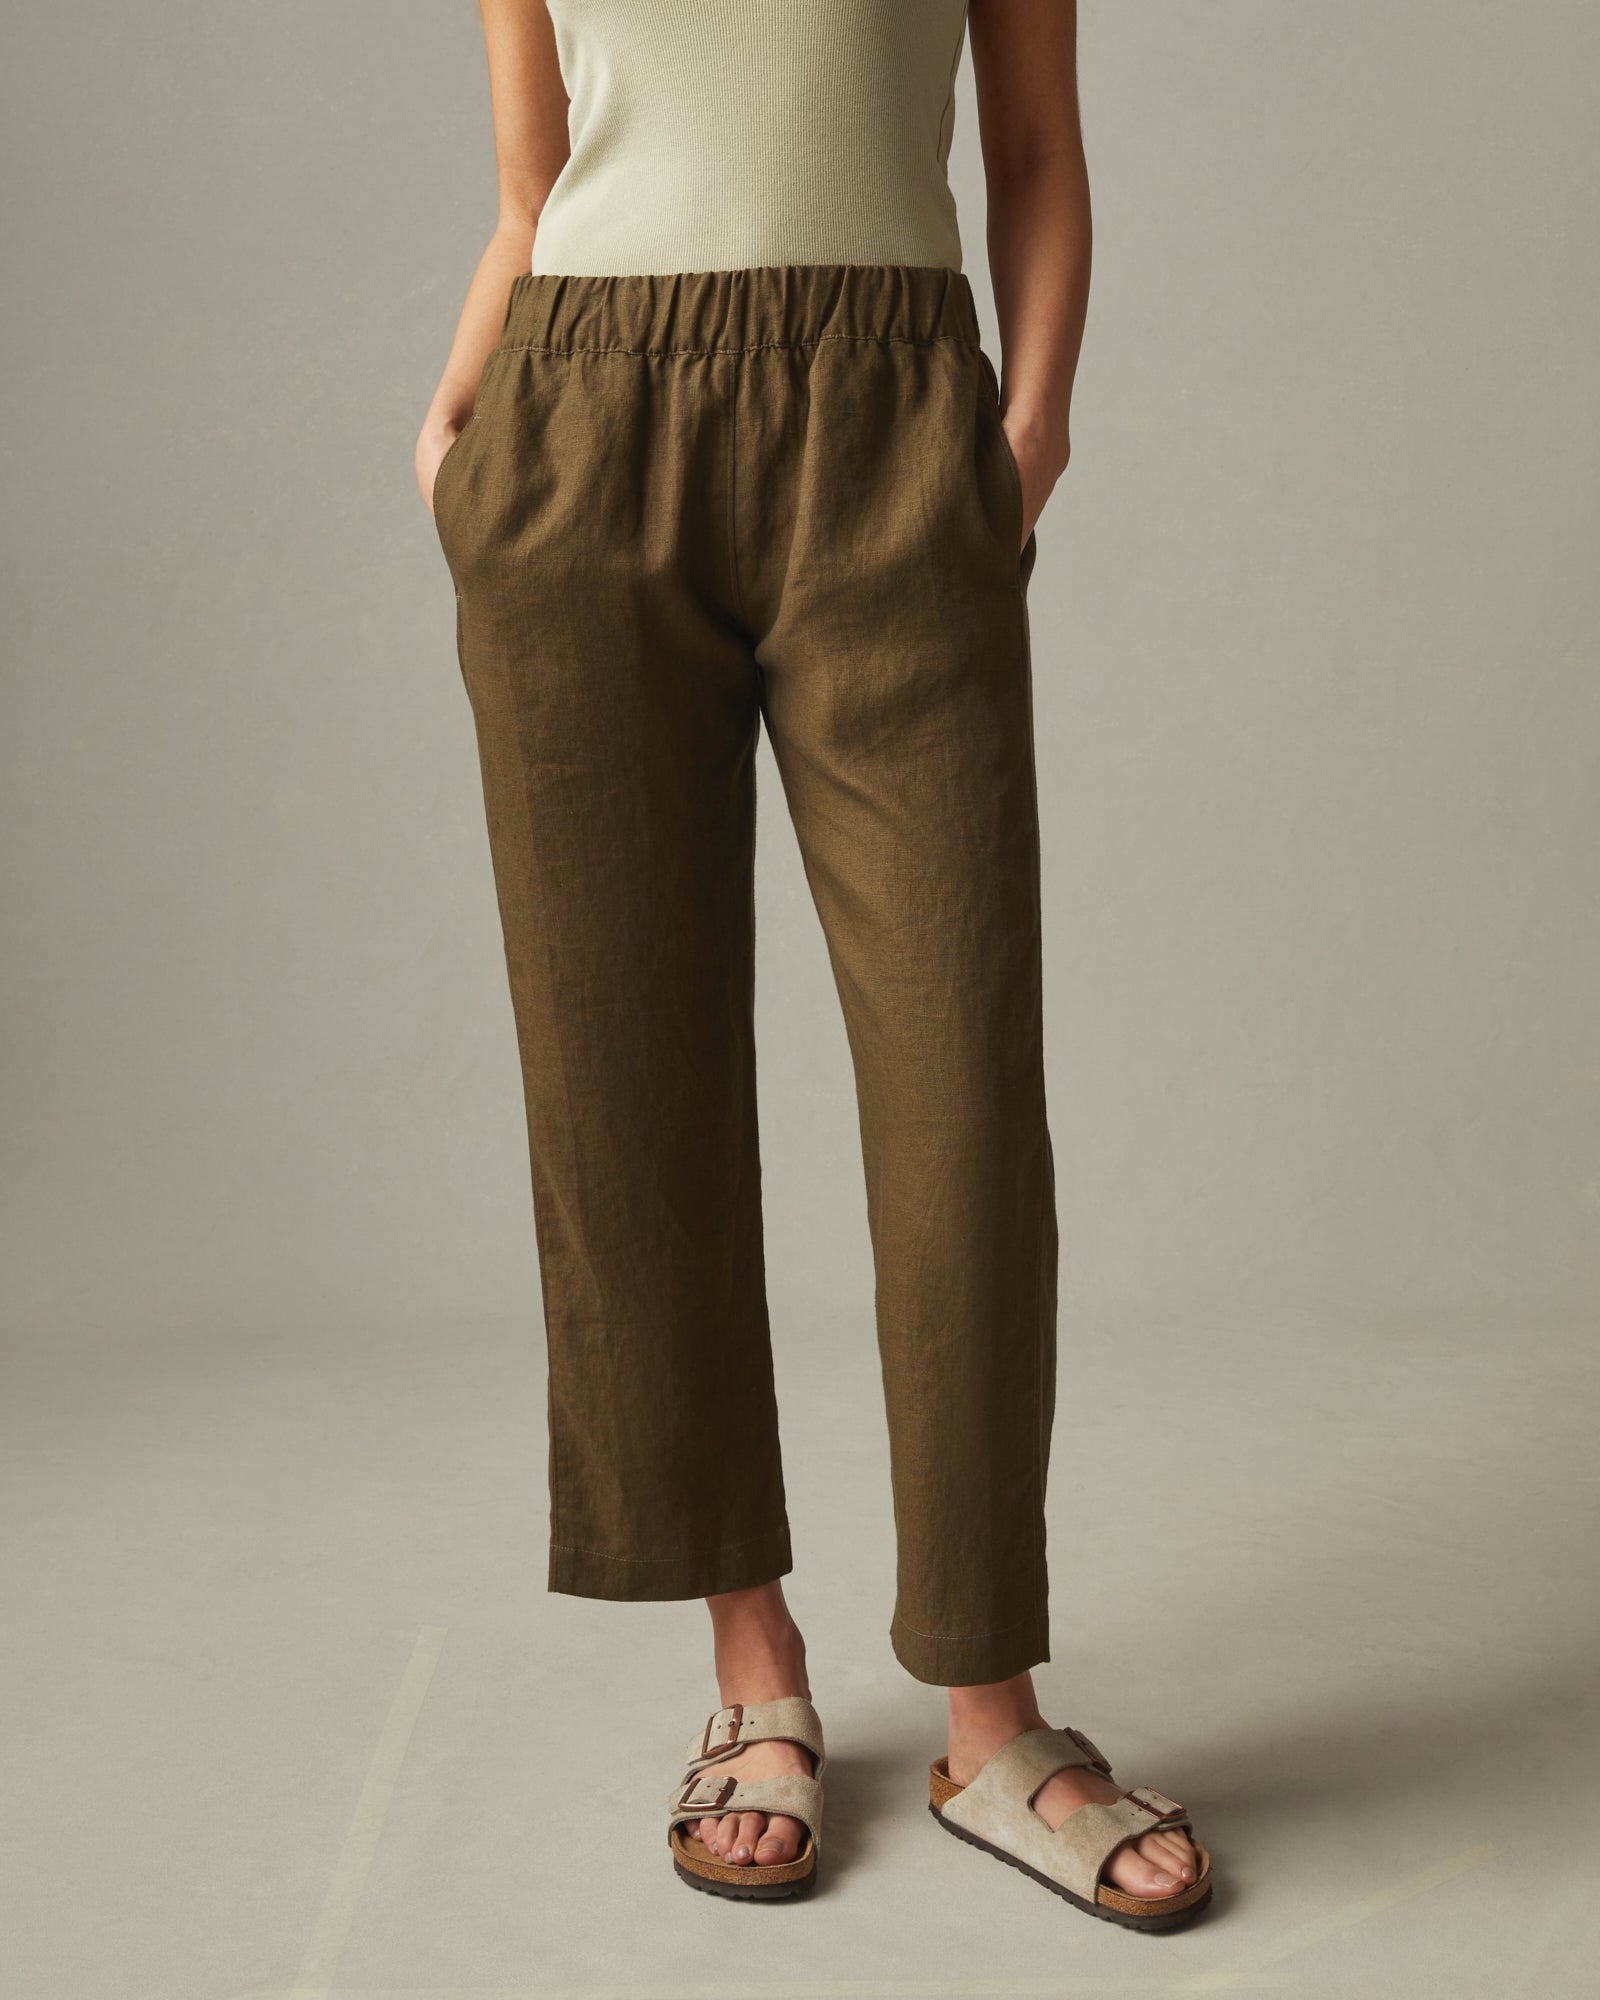 Emma Hill wears brown linen trousers, brown racer back vest top, strappy  sandals, Dragon Diffusion Cann… | Brown pants outfit, Brown linen pants,  Linen pants outfit